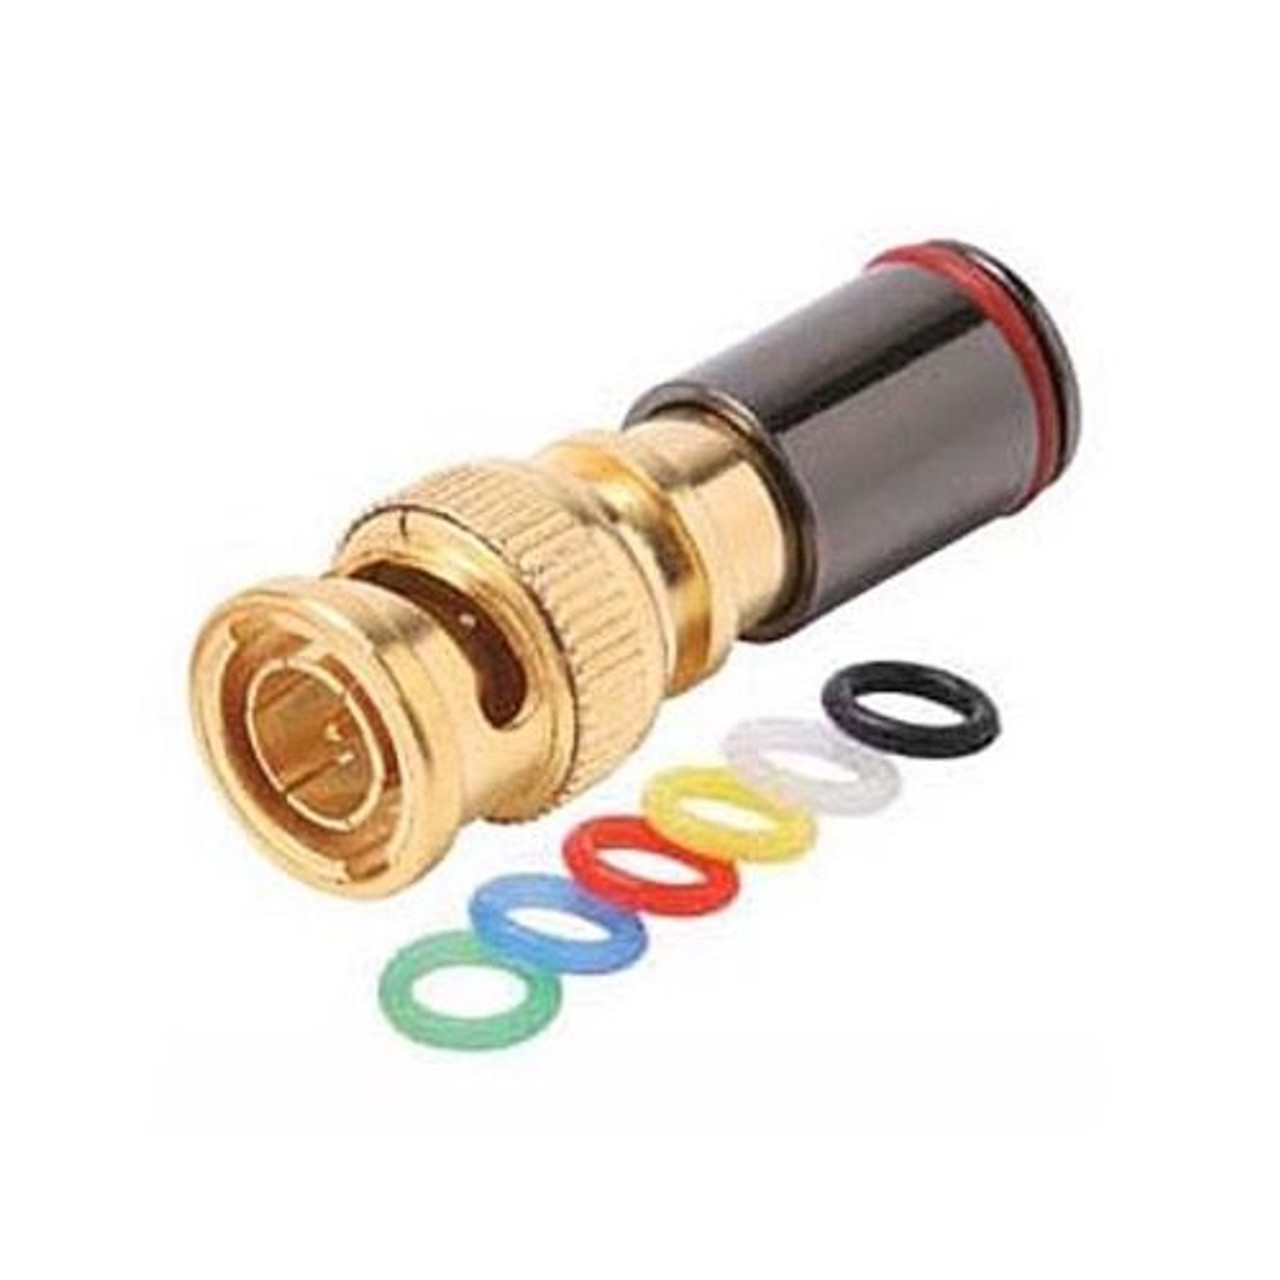 Eagle BNC Compression Connector RG-59 Gold Permaseal II Six Color Rings Coaxial Cable Snap-On Line Plug Adapter, RF Digital Audio Video RG59 Component Connection